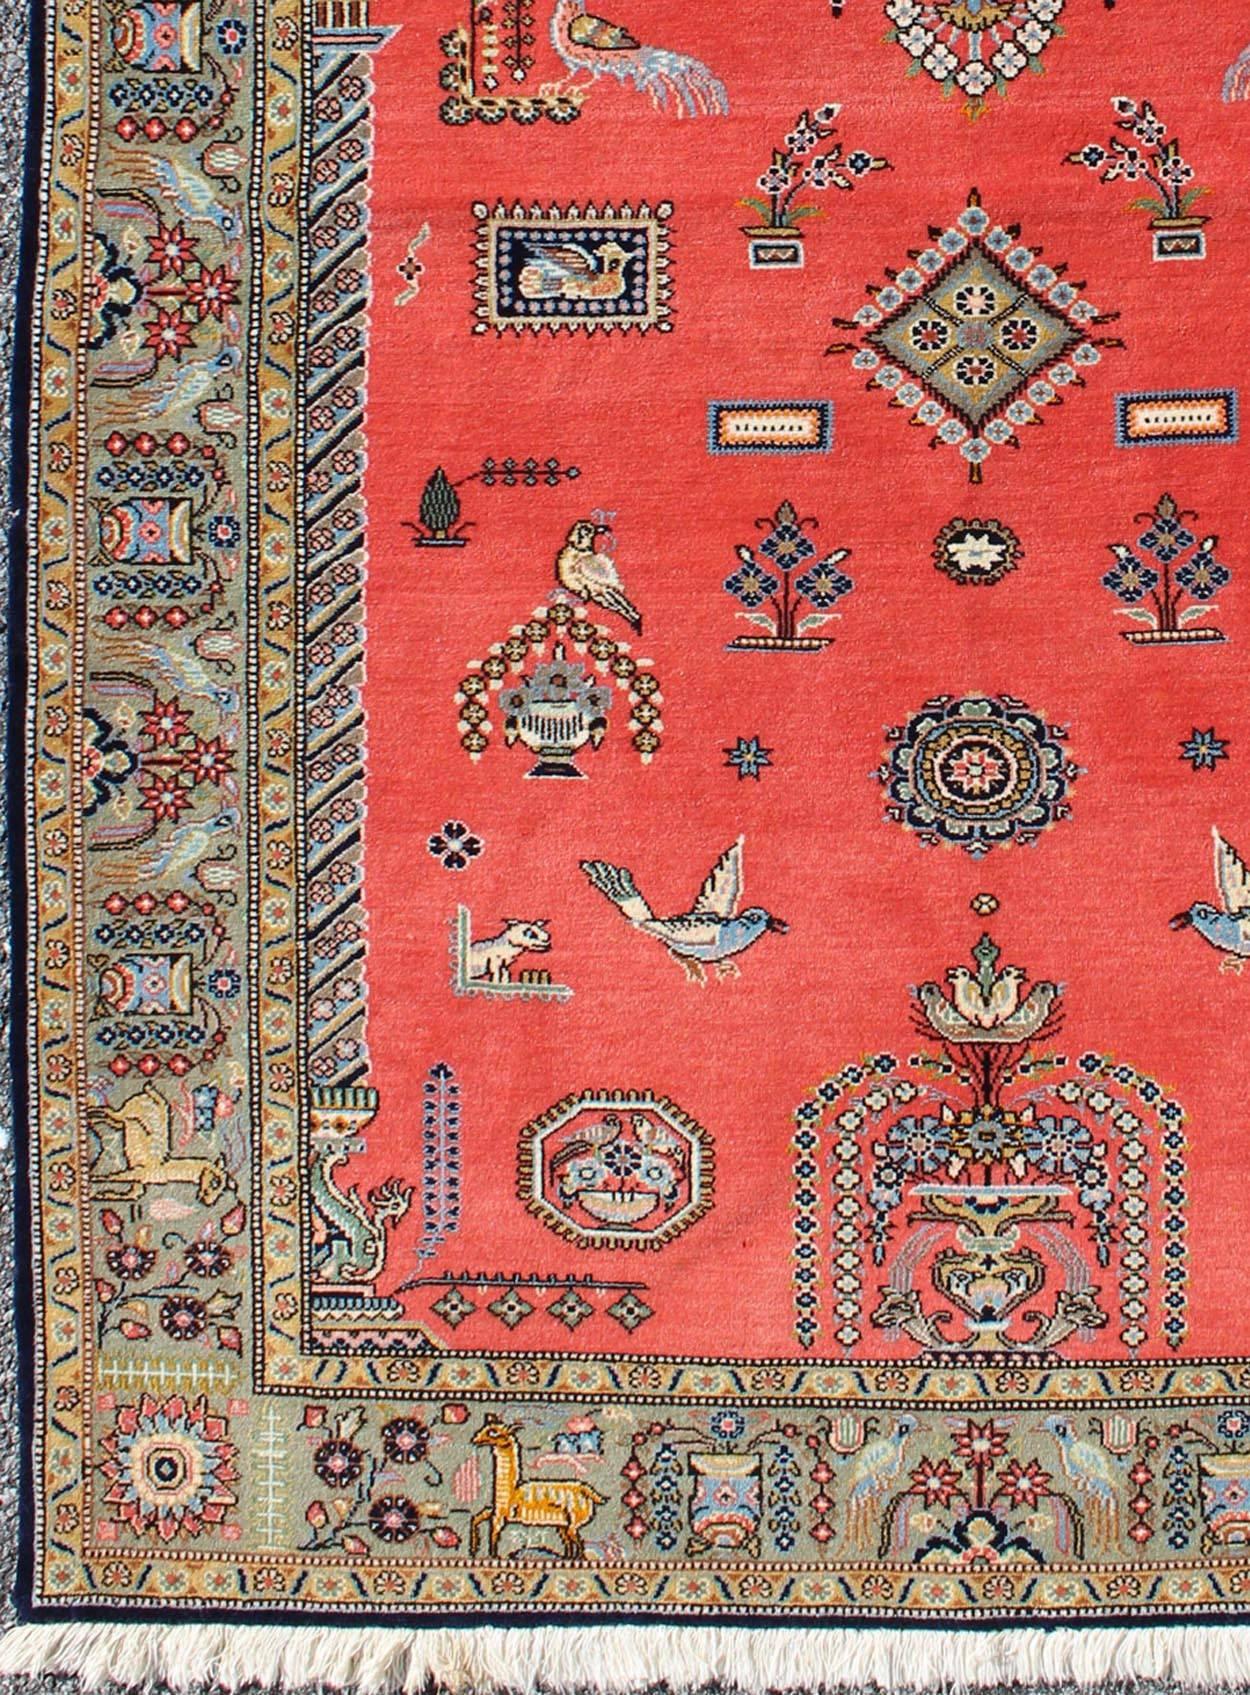 Vintage Persian Qum prayer rug with red field and tribal motif design, rug ke-307, country of origin / type: Iran / Qum, circa 1970

This beautiful vintage Persian Qum rug bears a prayer rug design and several various tribal designs hosted in the